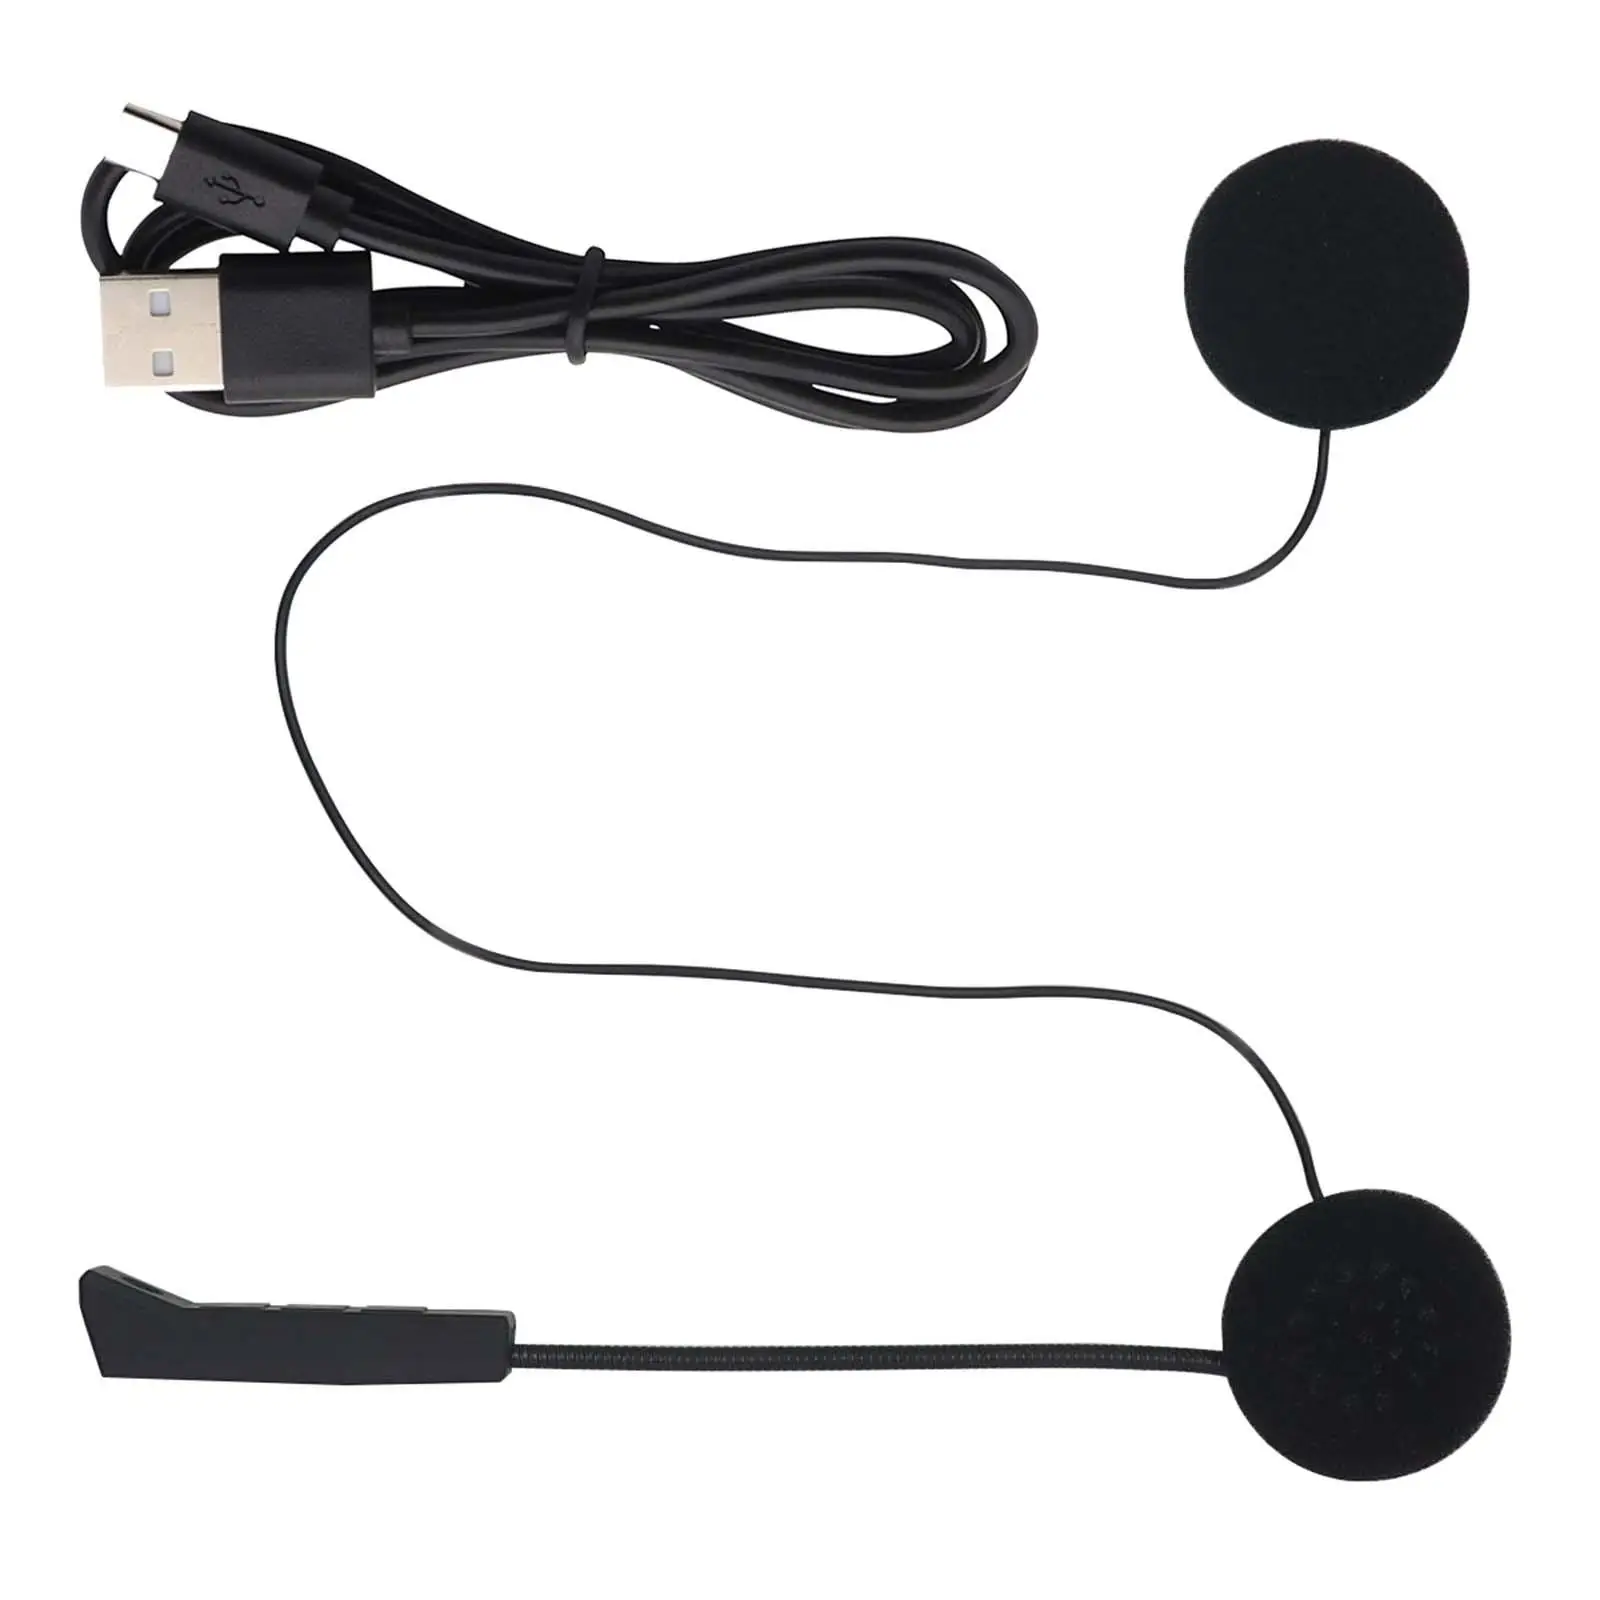 Motorcycle Helmet Headset Hands Free Phone Call with Long Battery Life